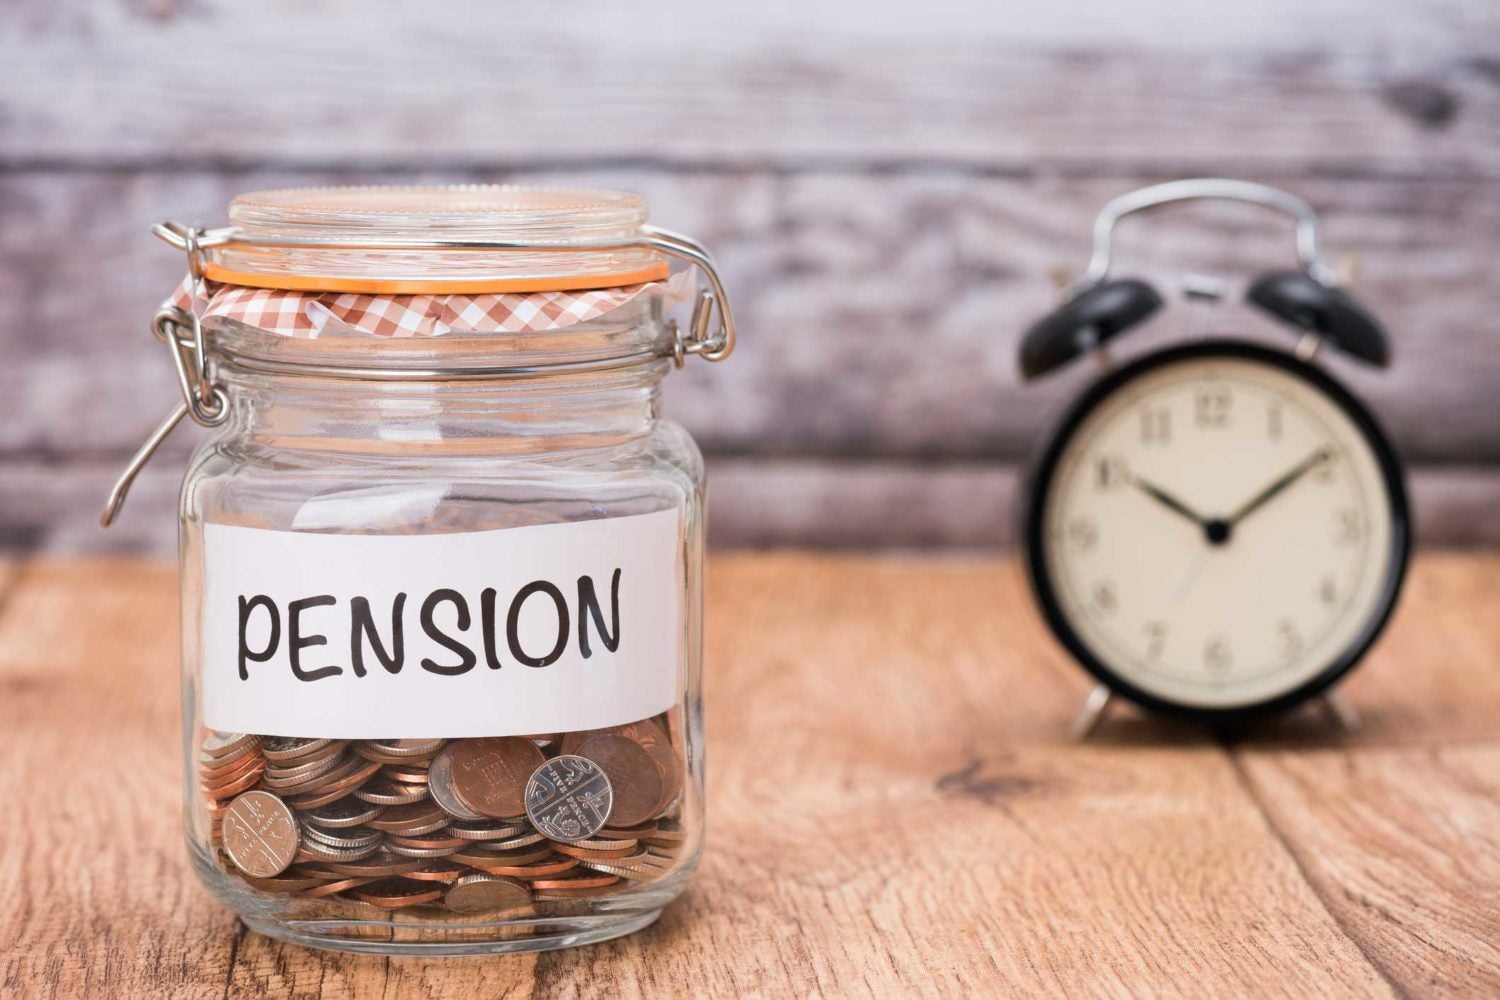 DBS pensioners receive 9 months pension increments arrears from PTAD